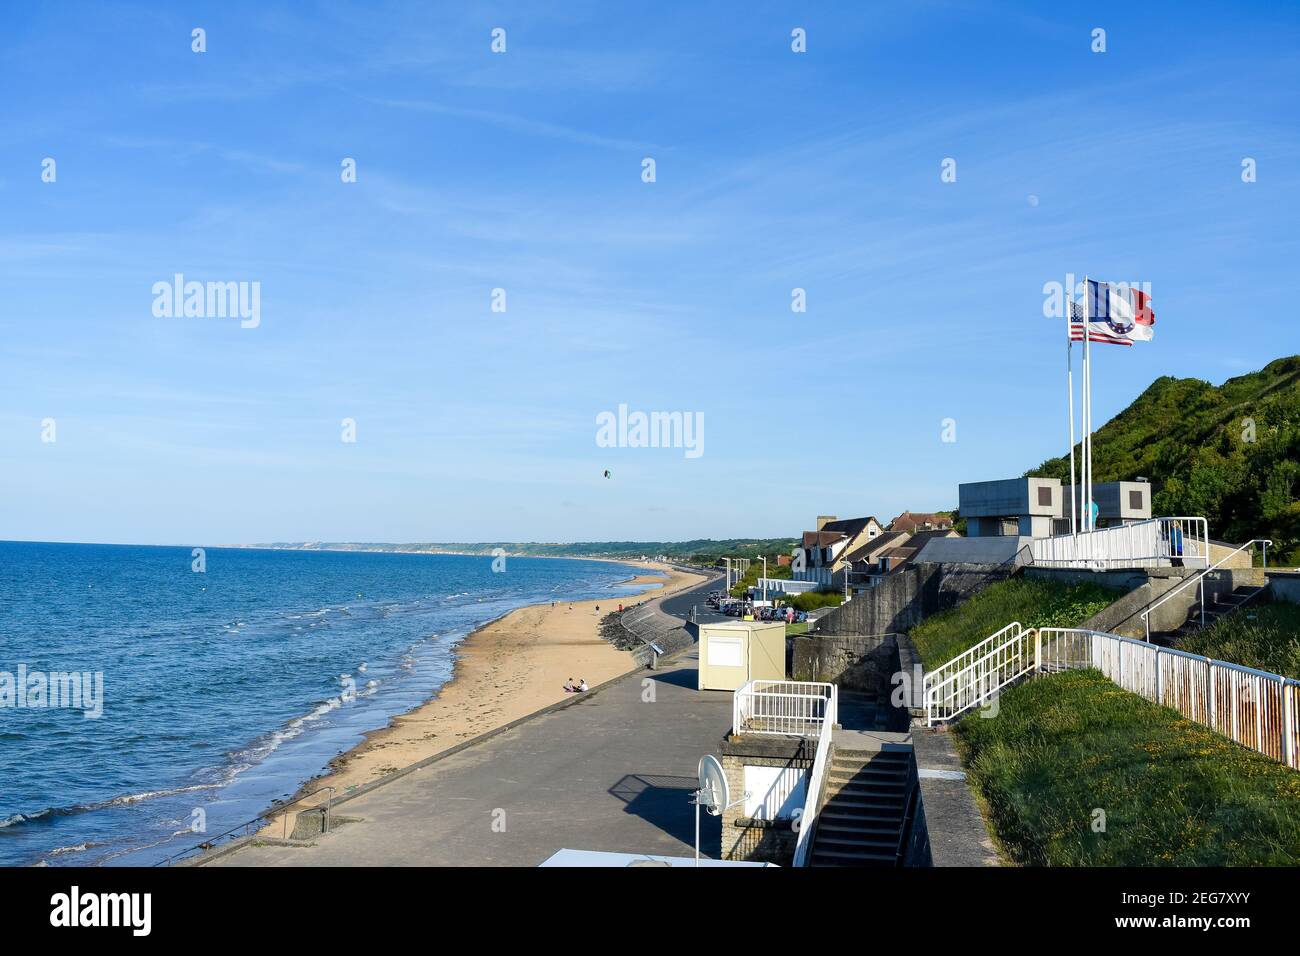 NORMANDY, FRANCE - July 4, 2017: Historic beach called Omaha Beach in Vierville-sur-Mer, from the battle of the Normandy landings during the Second Wo Stock Photo